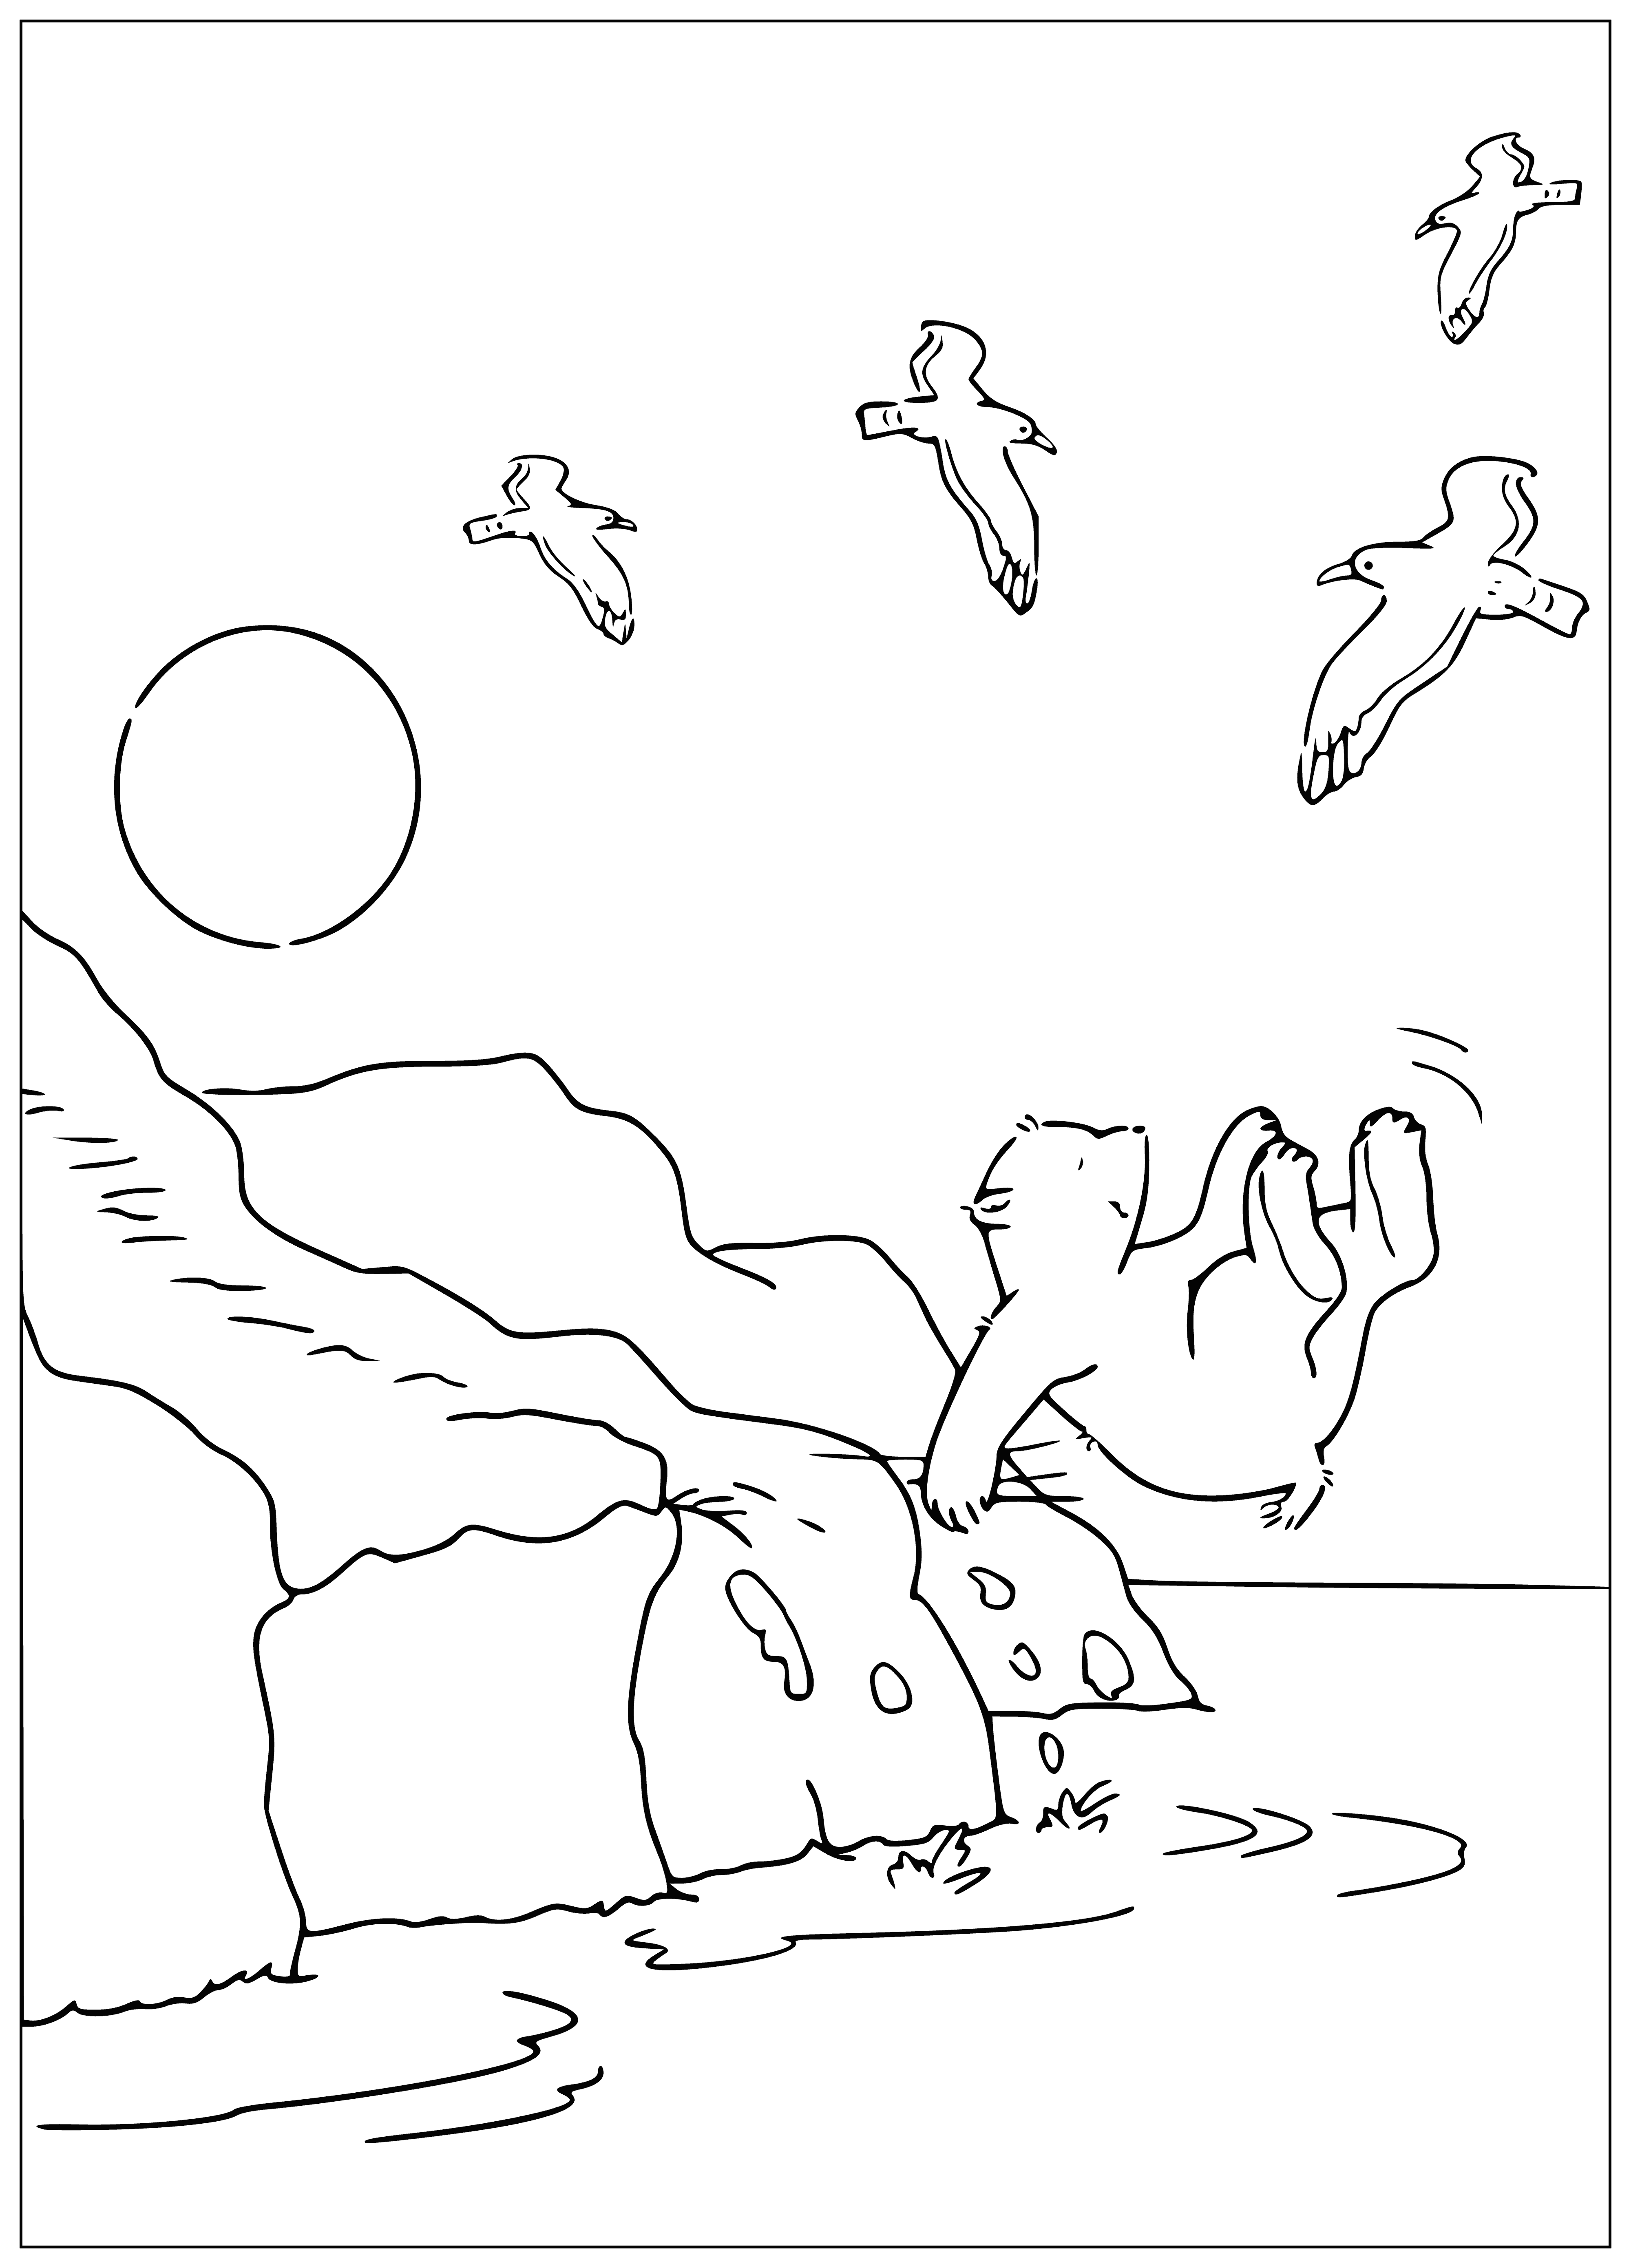 coloring page: Little polar bear explores ice, water and looks for something. Has fun swimming; looks for camera when back on ice.